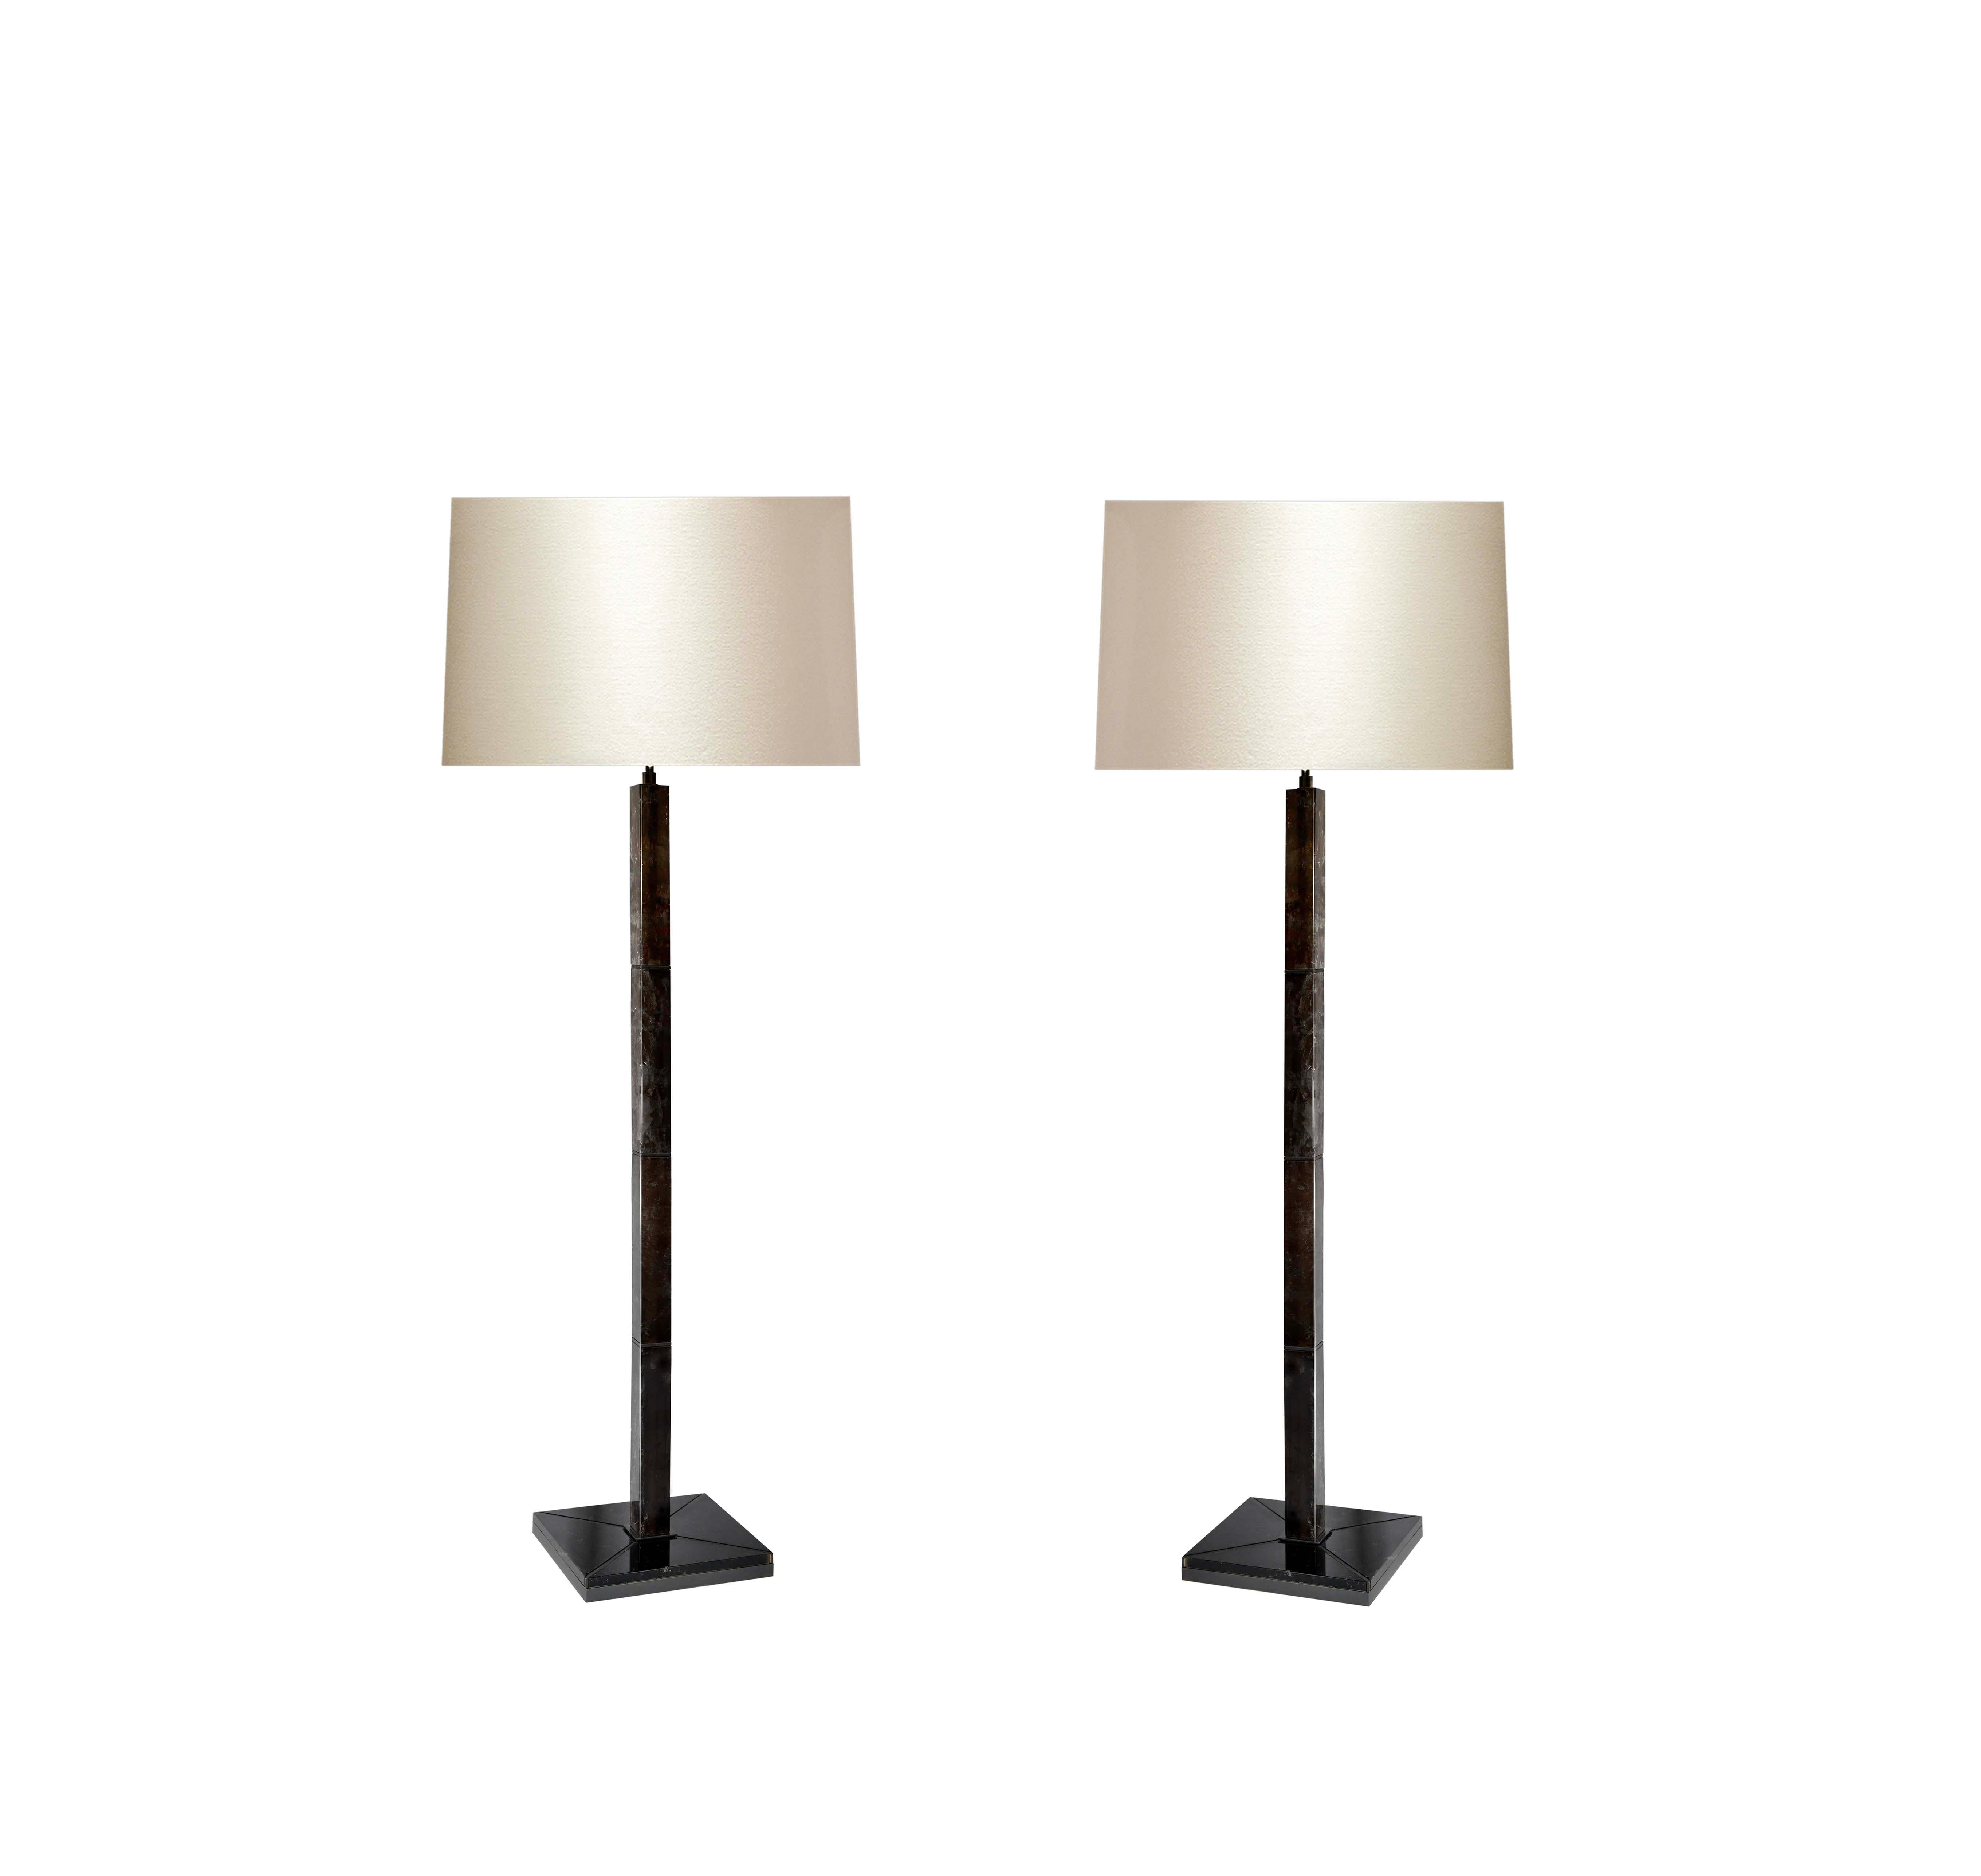 Pair of square sectional column dark smoky rock crystal floor lamps with dark brass finishes. Created by Phoenix Gallery. NYC. 
To the top of rock crystal: 54